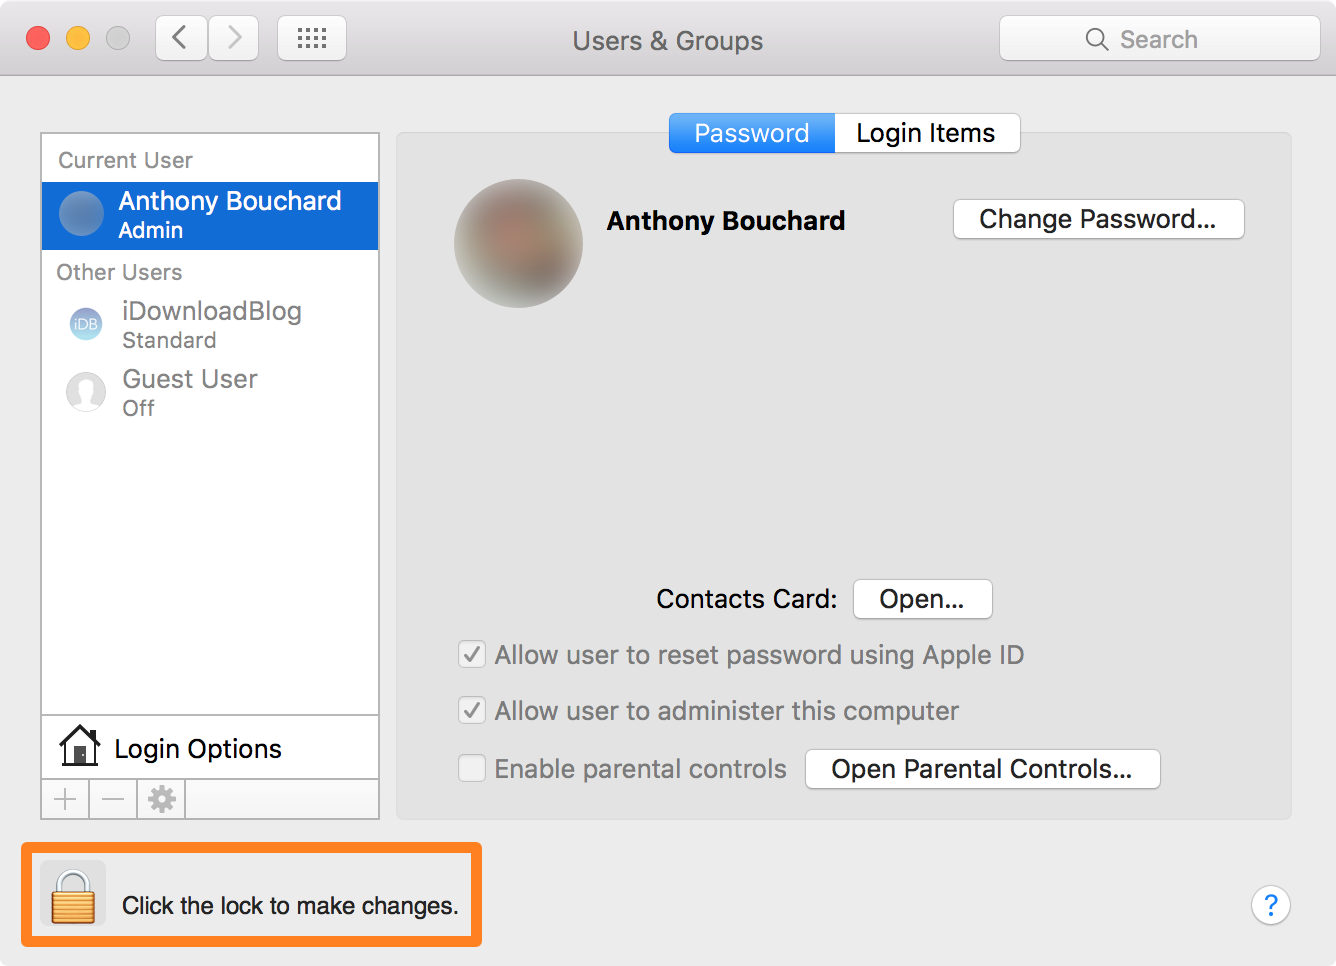 OS X Click the lock to make changes